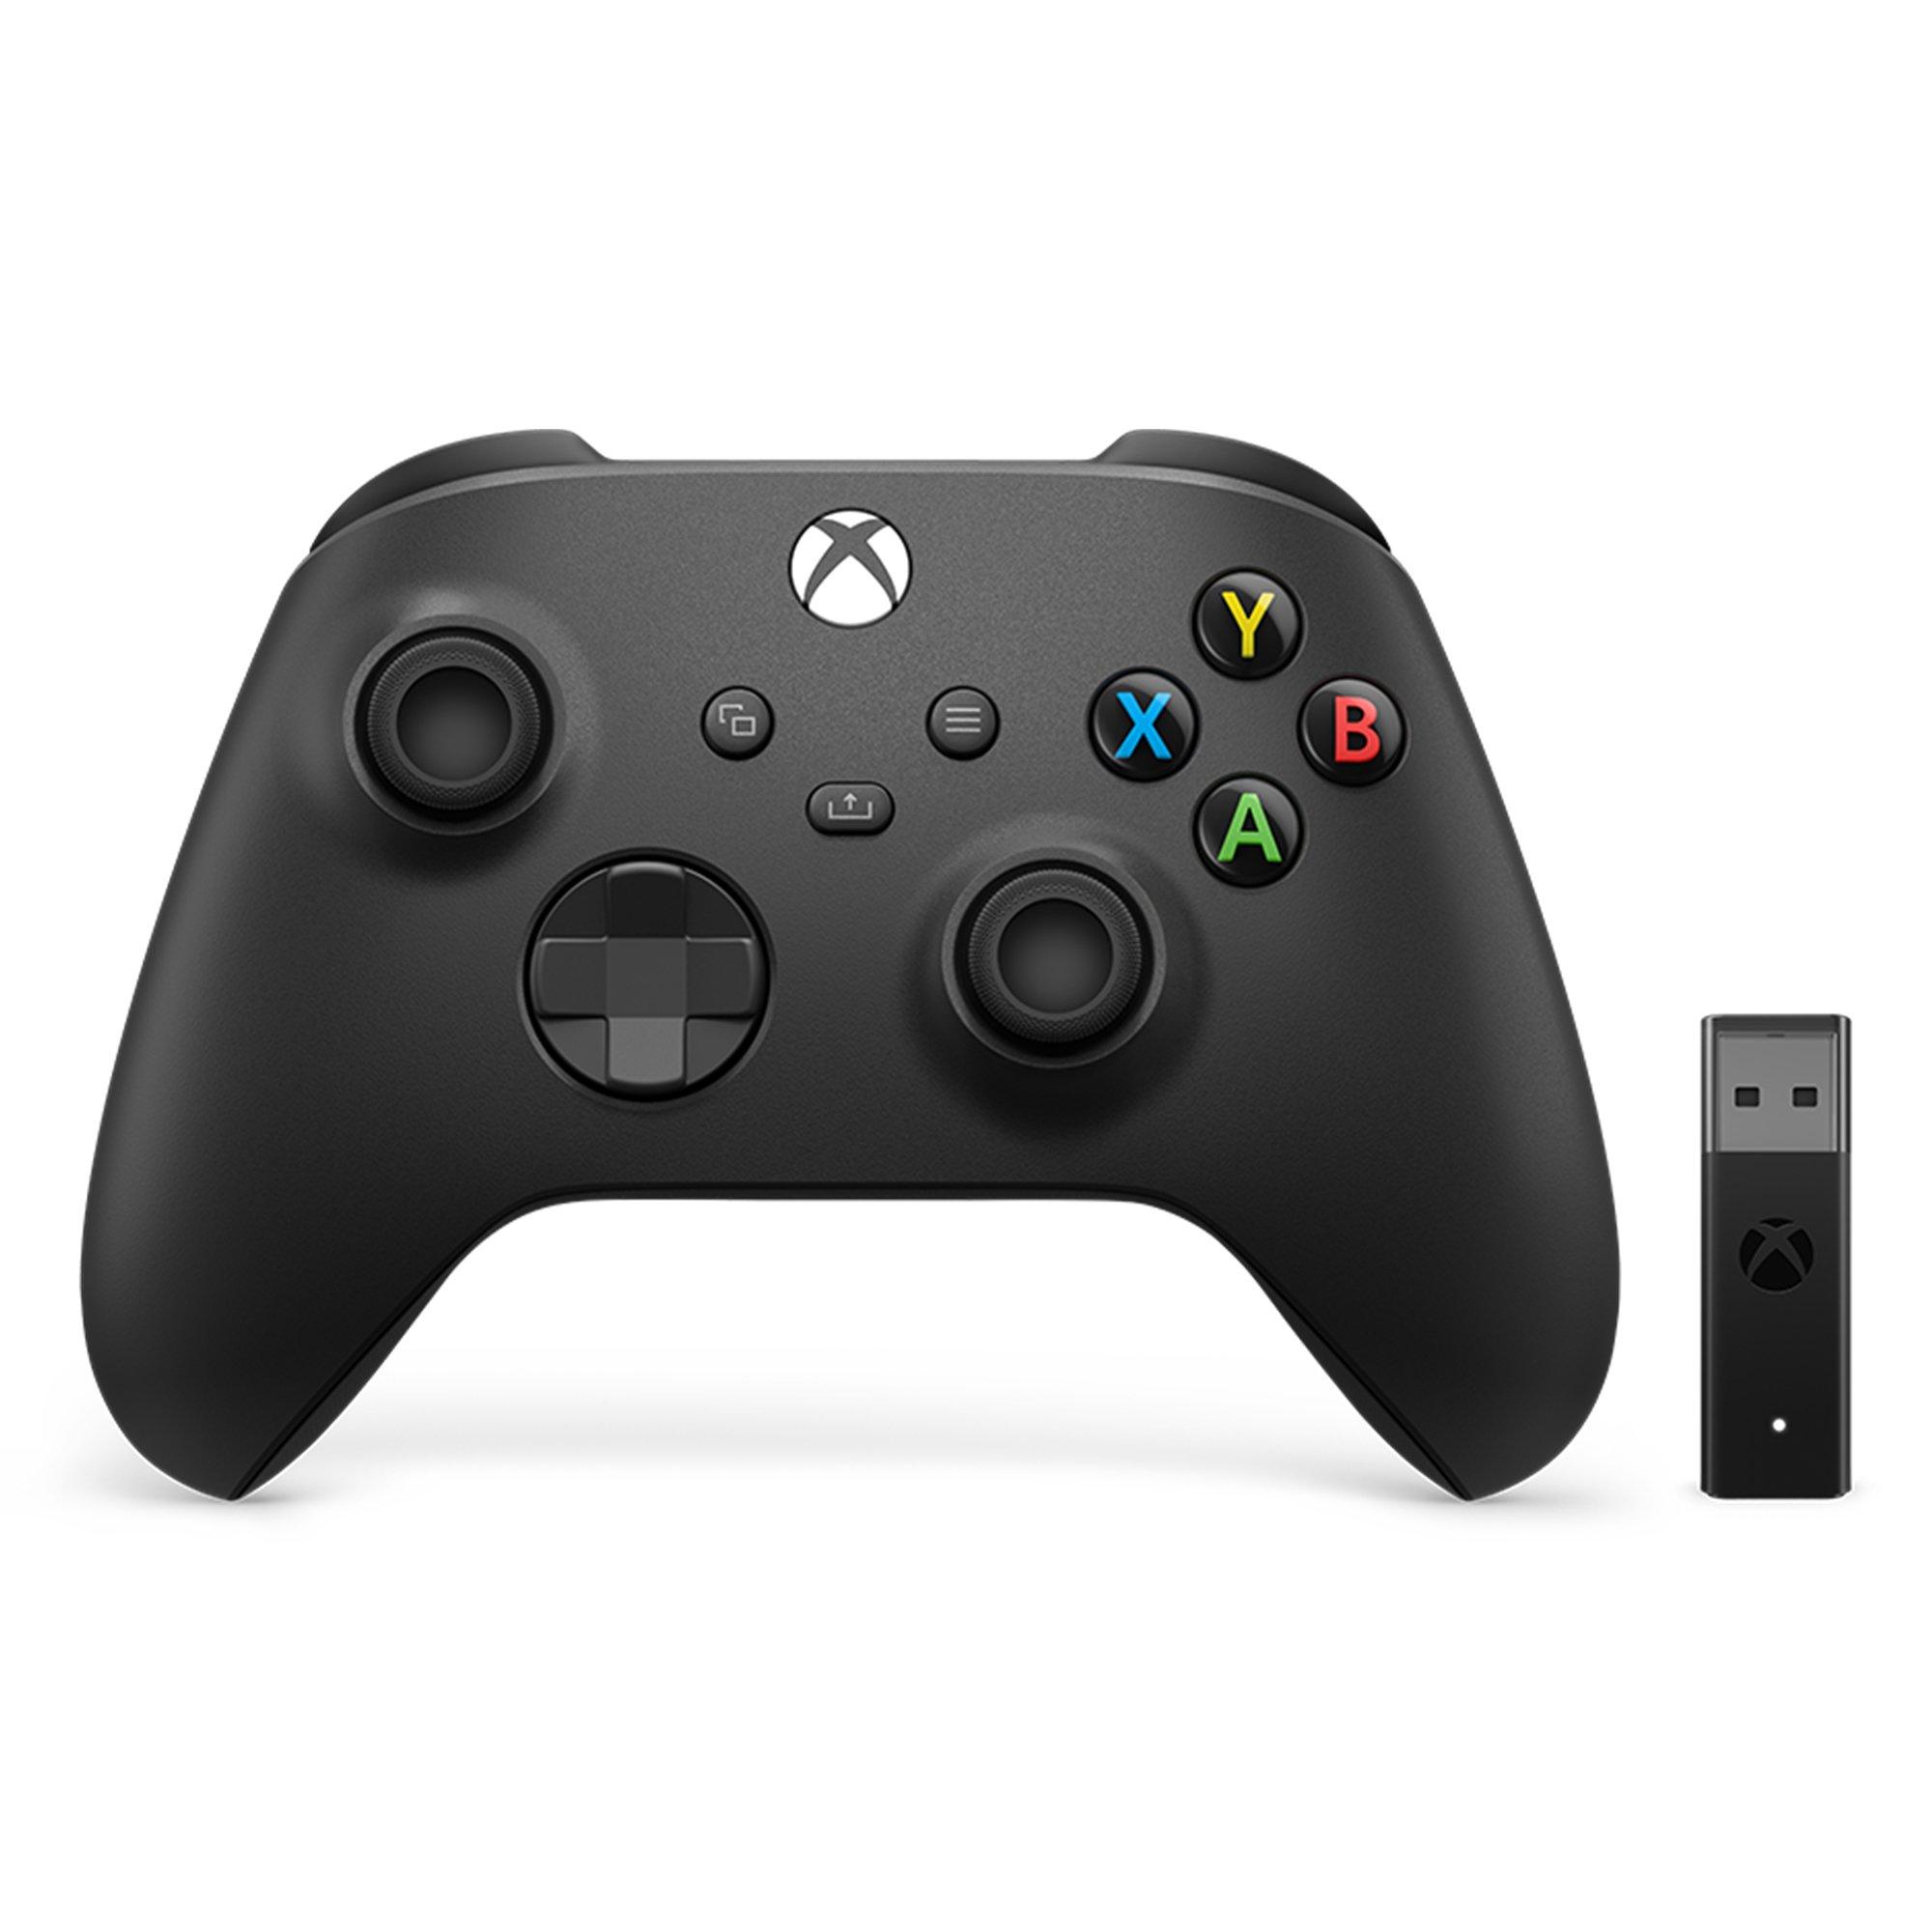 Power Injustice Bishop Microsoft Xbox Series X Wireless Controller with Wireless Adapter for  Windows 10